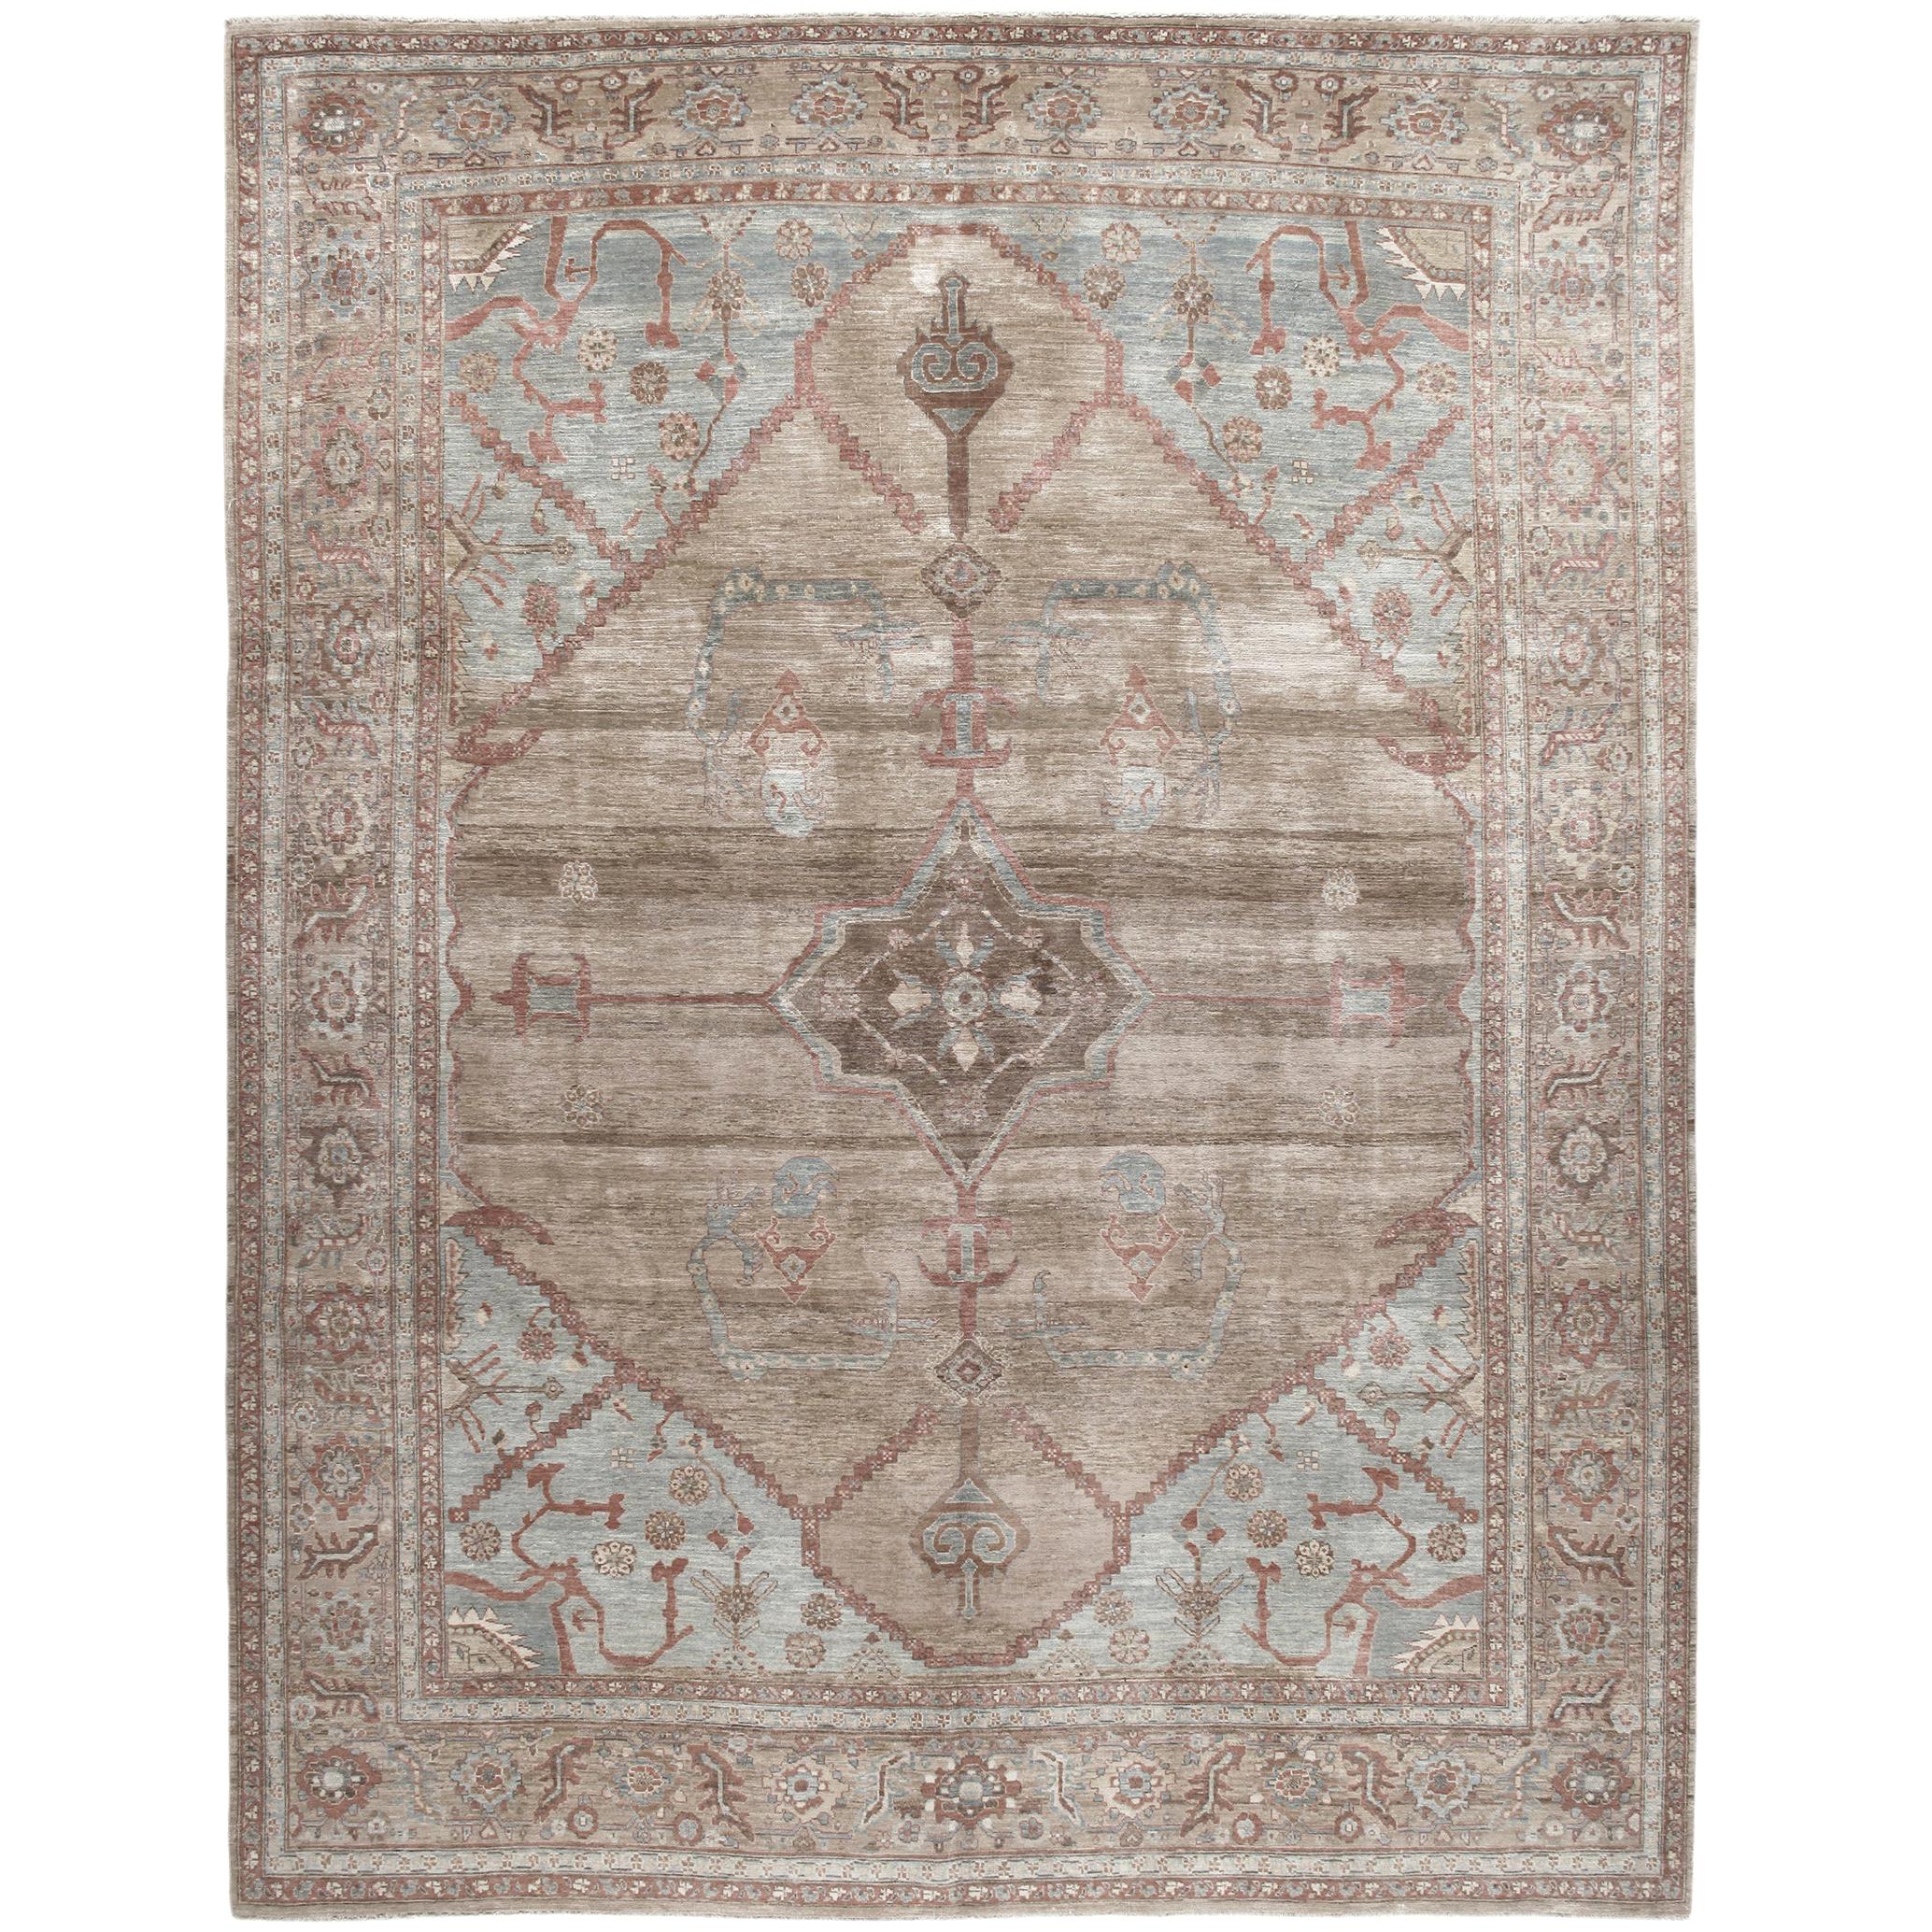 Persian Traditional Bakshaish Handknotted Rug in Camel and Pale Blue Color